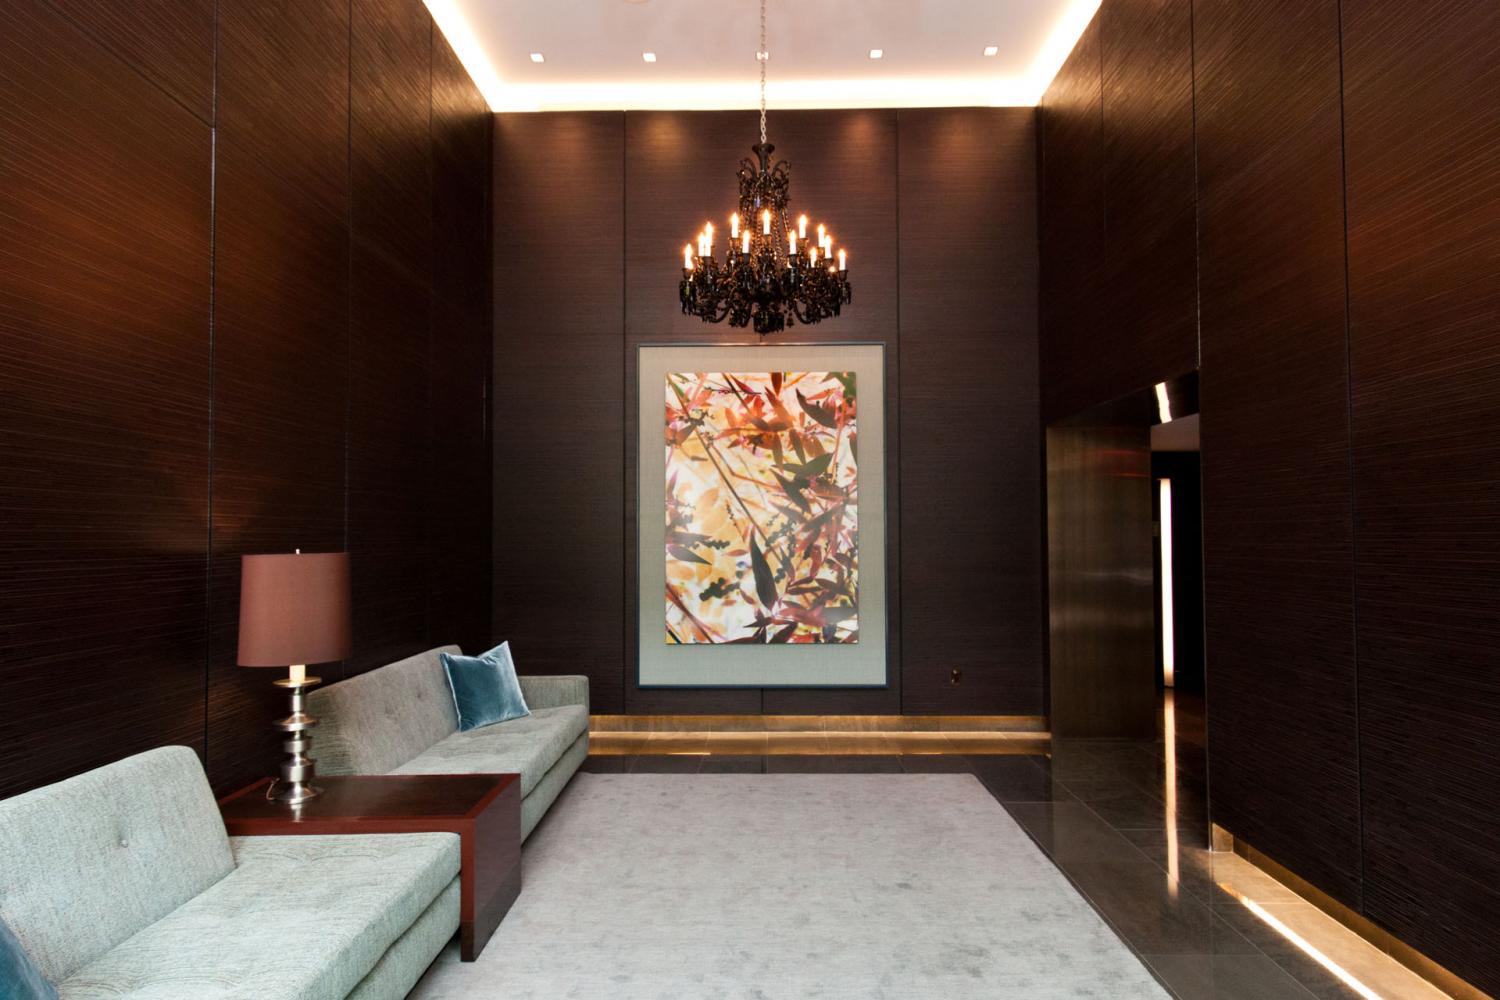 Decor Boiserie wall panels by Laurameroni inserted in the Rector Place interior design for a luxury modern lifestyle ambience